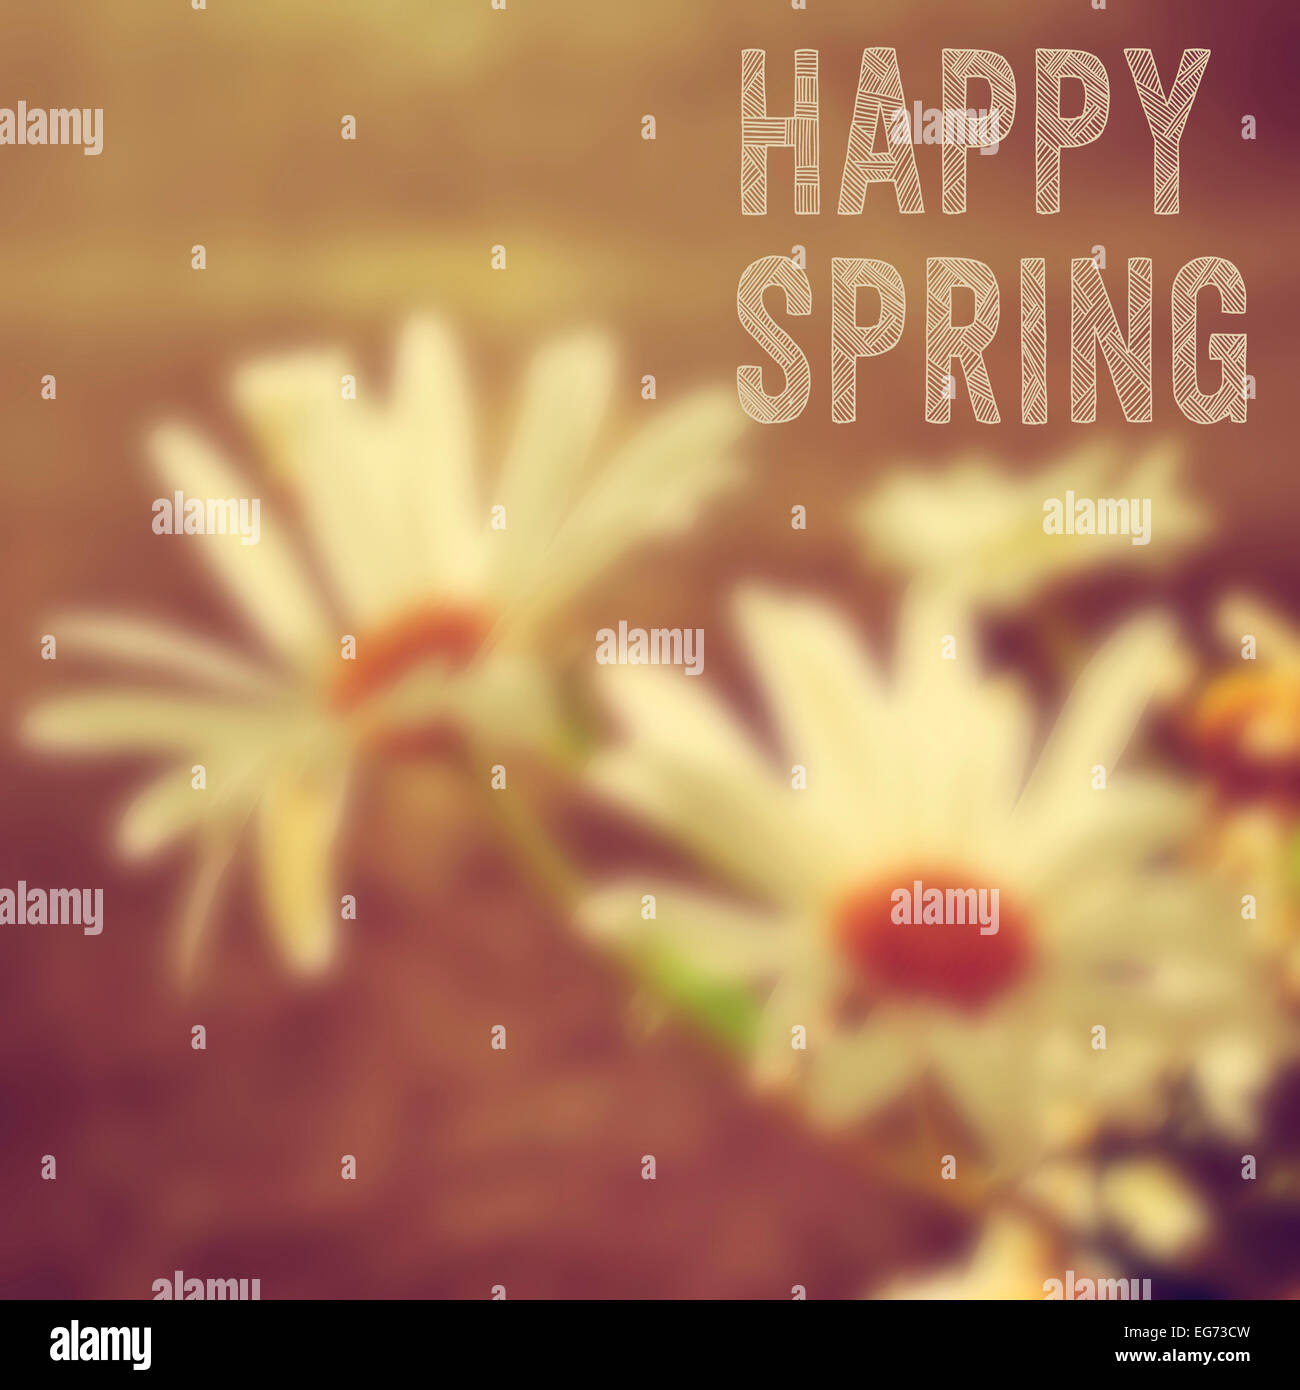 the text happy spring written on a blurred image of white daisies Stock Photo